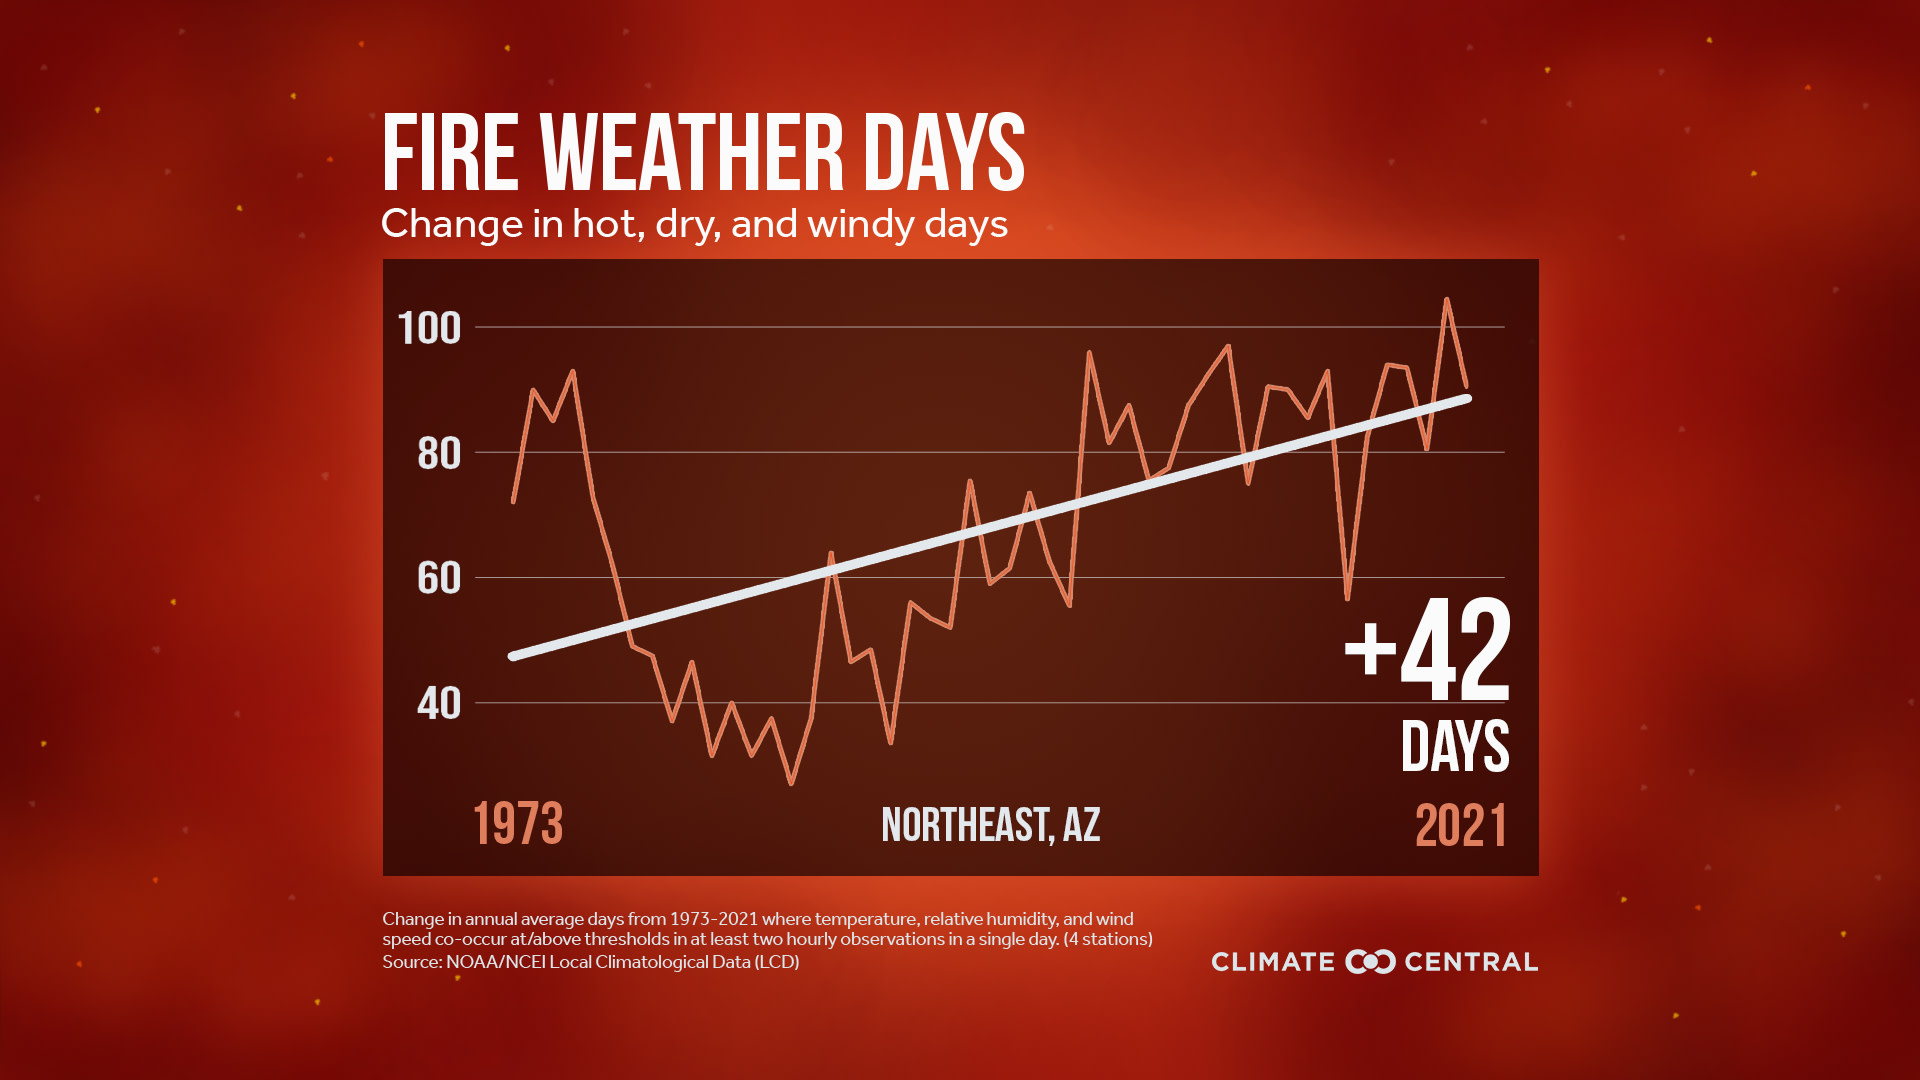 Fire weather days by climate division - Western Fire Weather Days Increasing